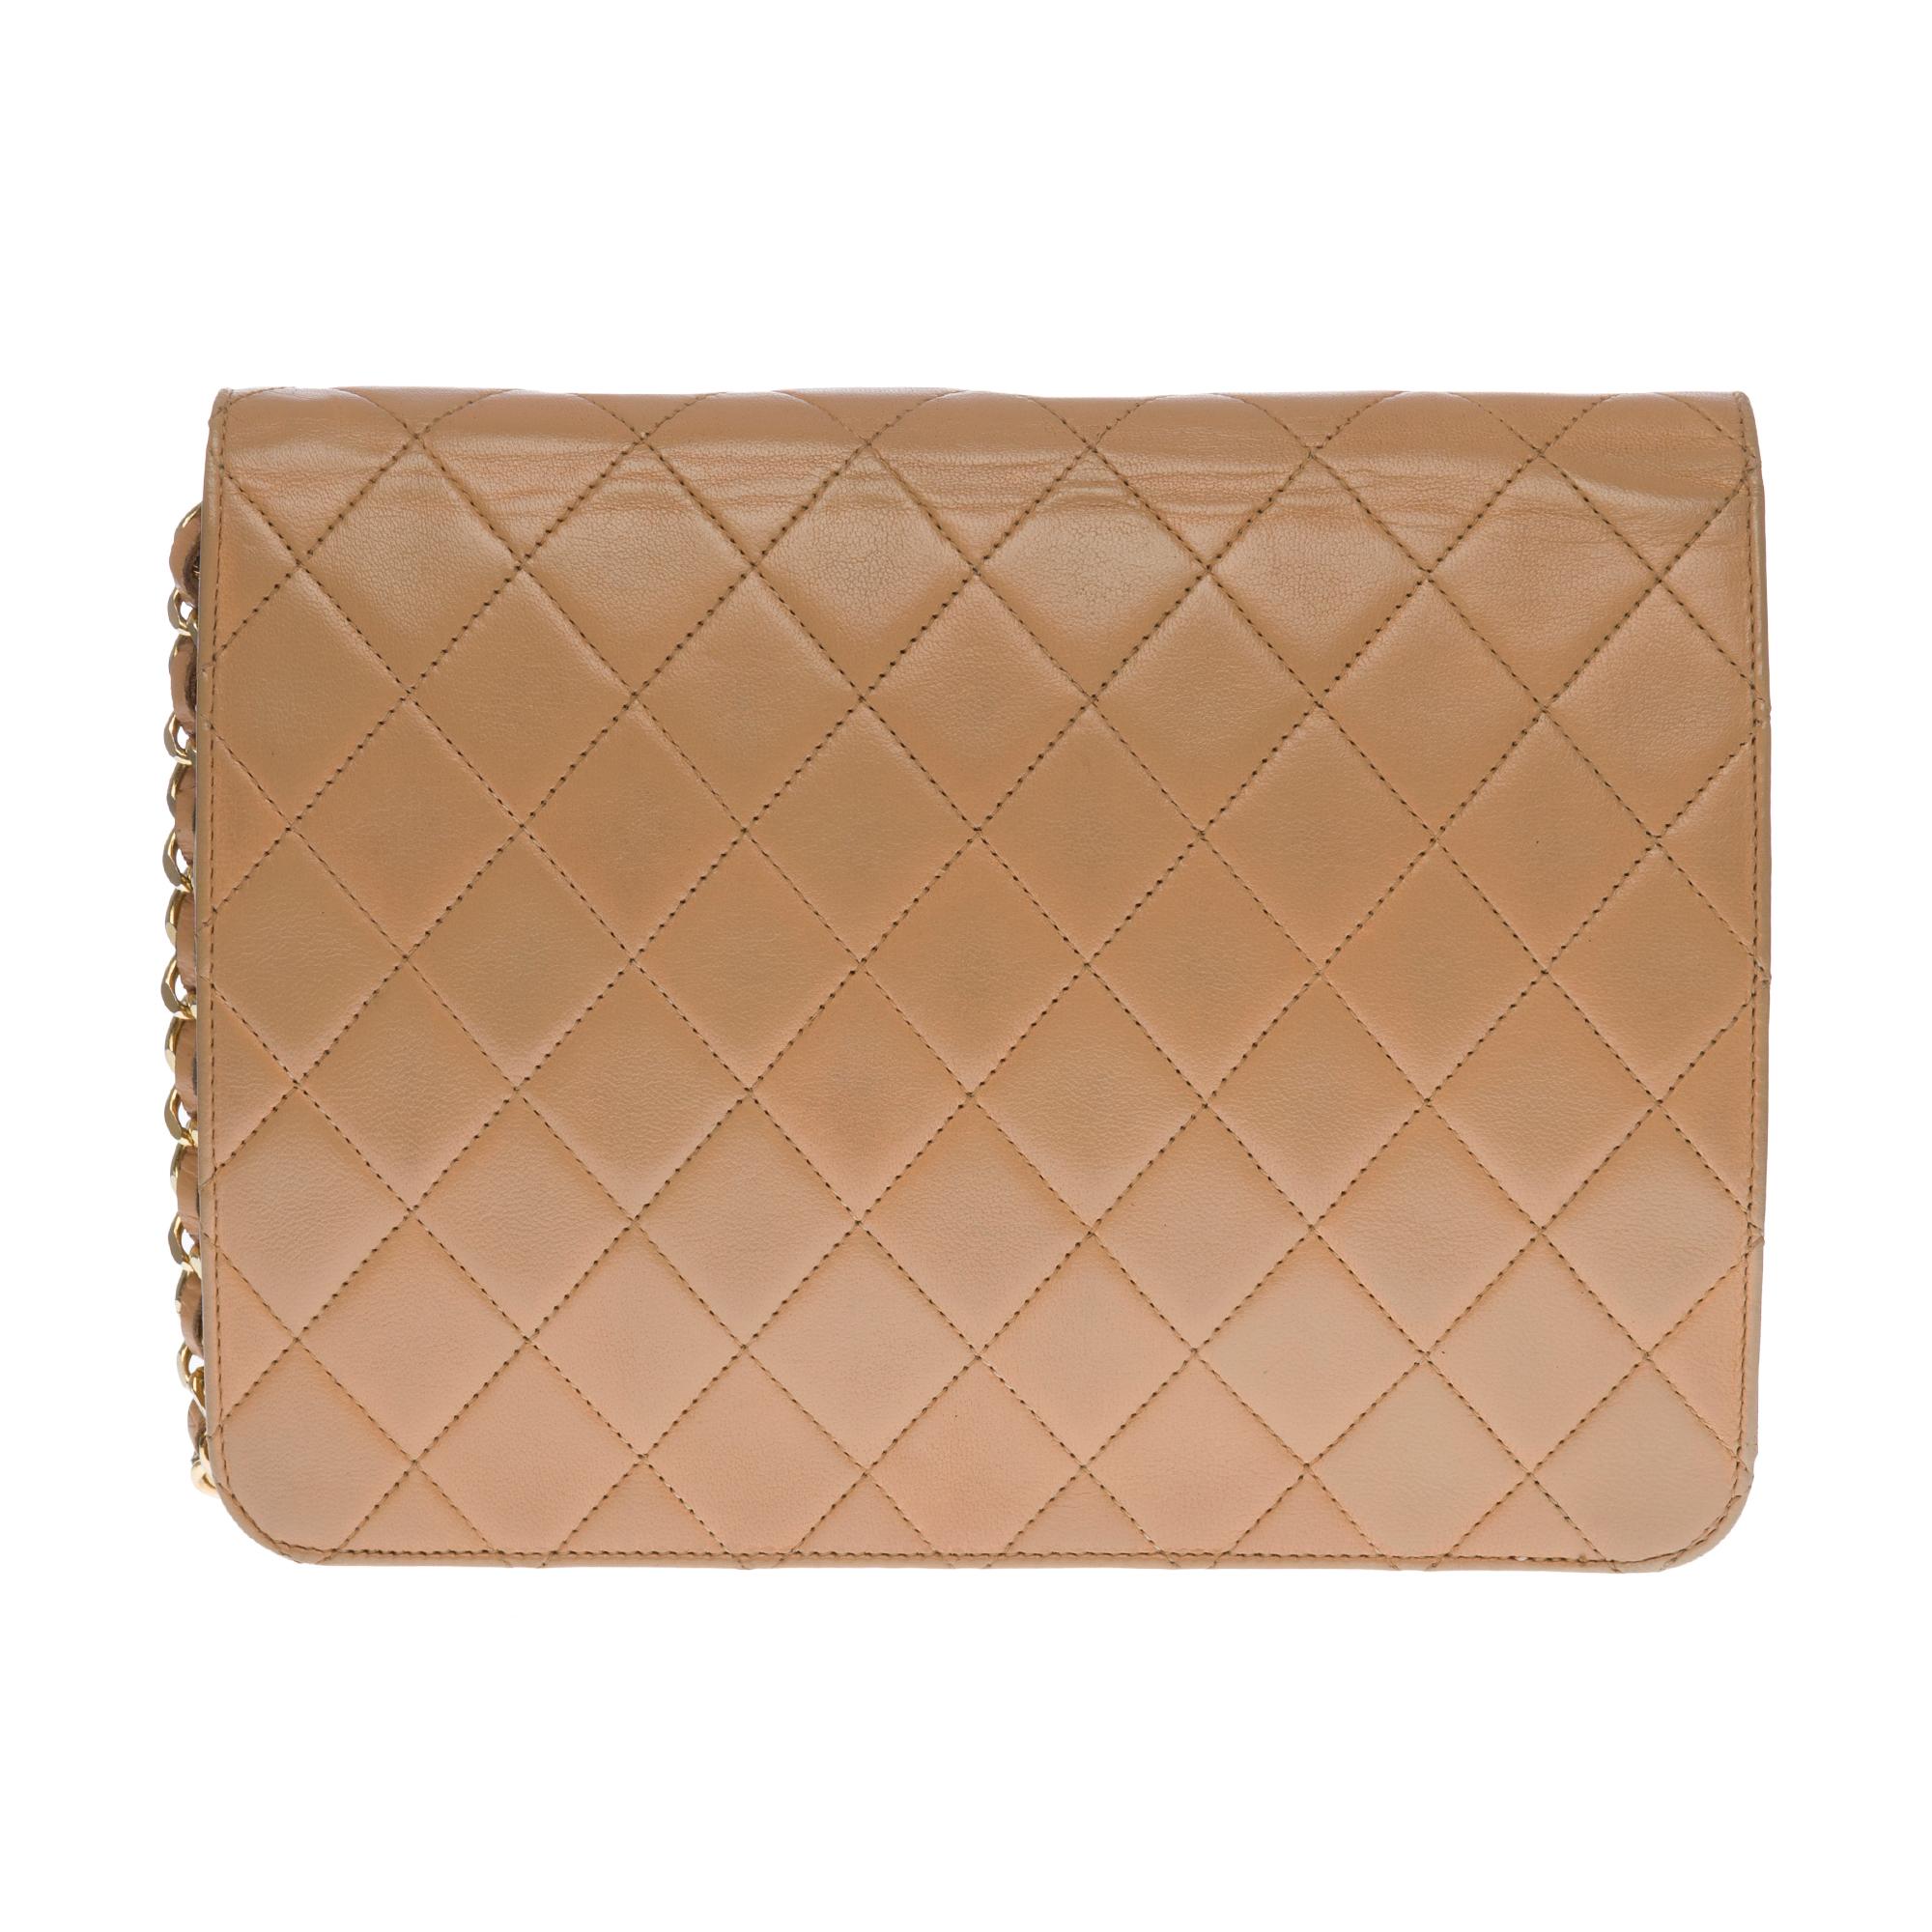 Splendid Chanel Classique shoulder bag in beige quilted leather, gold-tone metal hardware, a gold-tone metal chain handle intertwined with beige leather for a shoulder support .

Gilded metal logo closure on flap.
Lining in beige leather, zipped